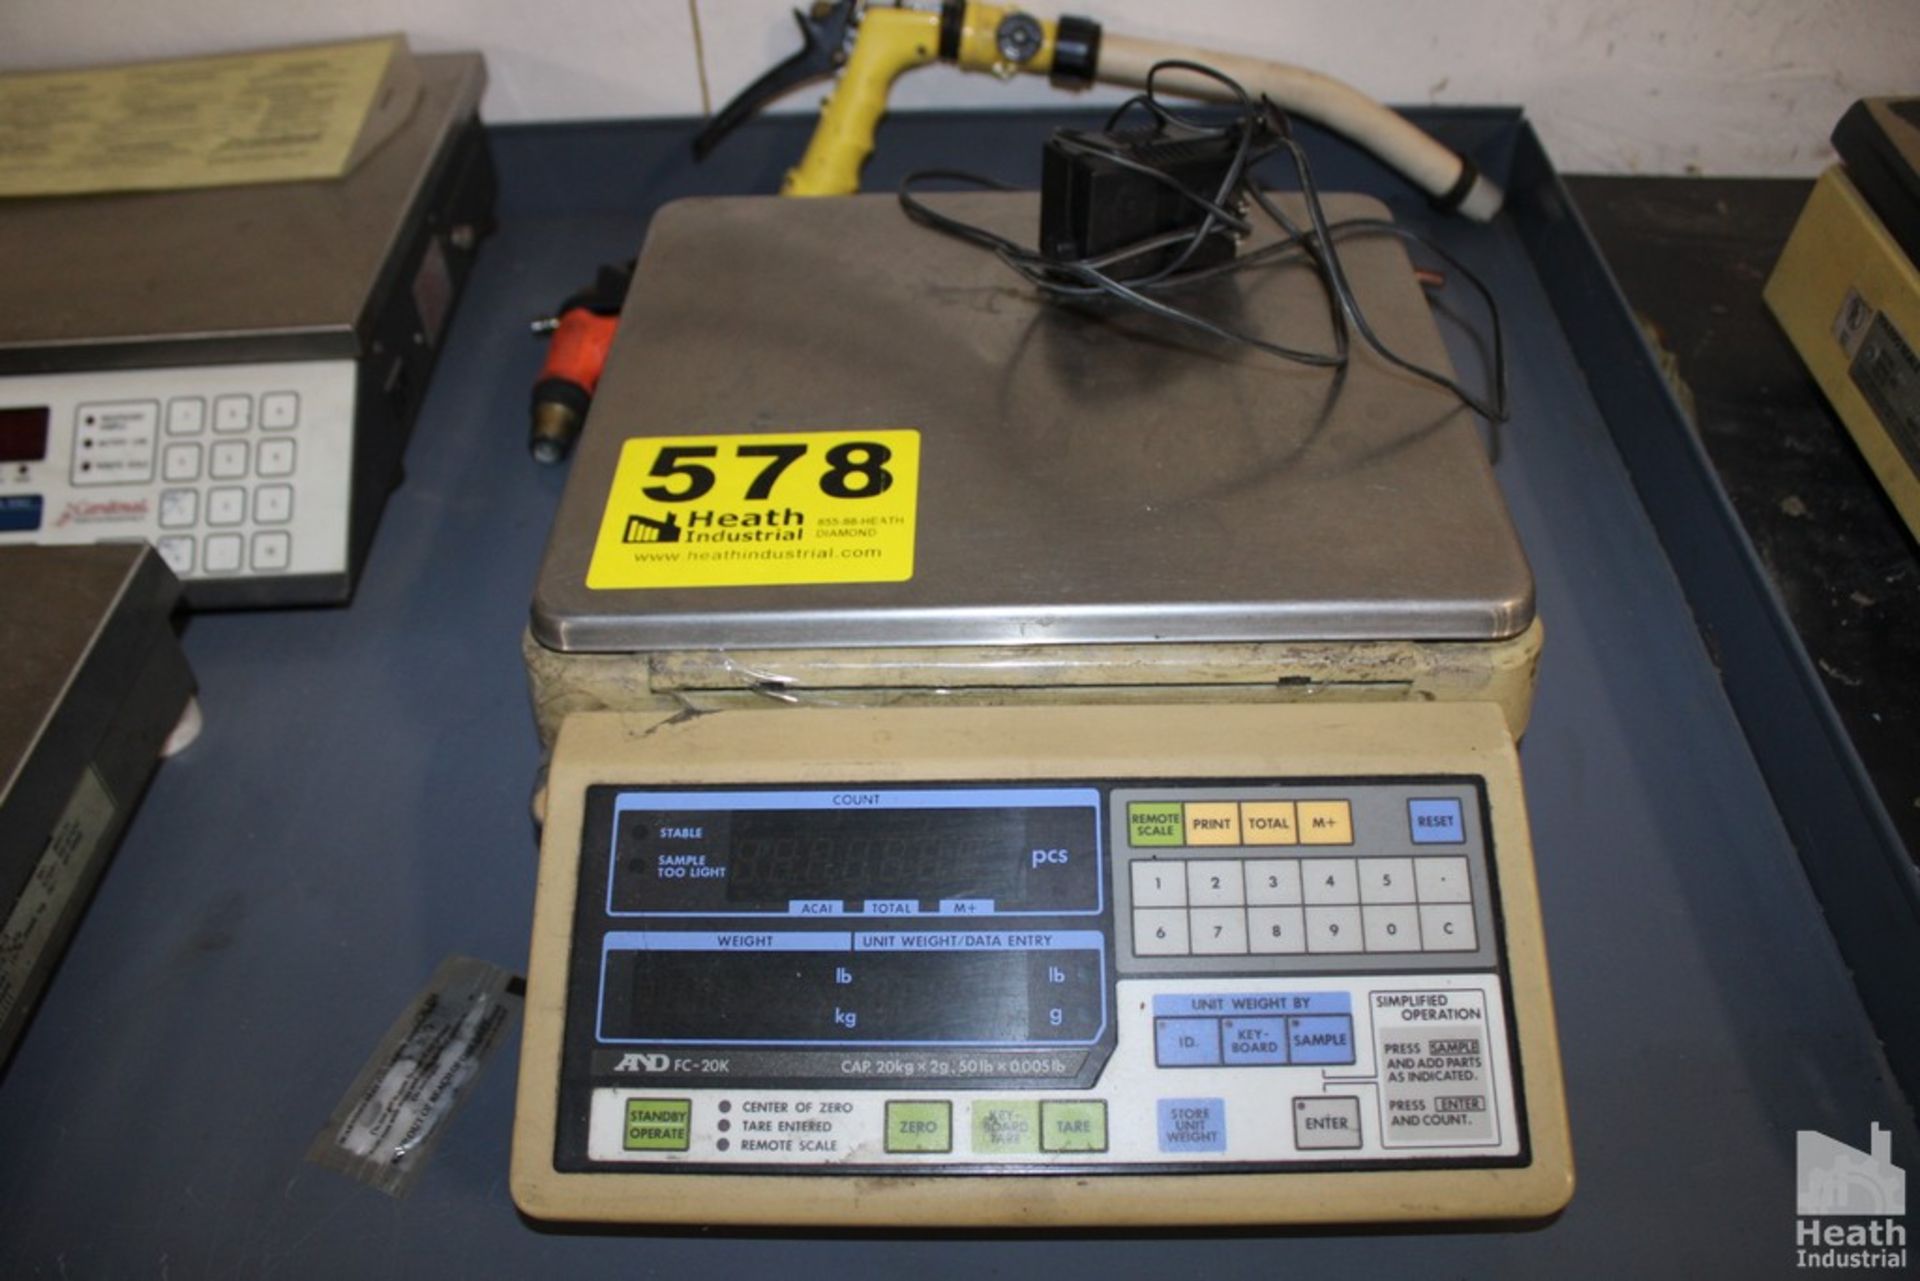 AND FC-201C DIGITAL COUNTING SCALE